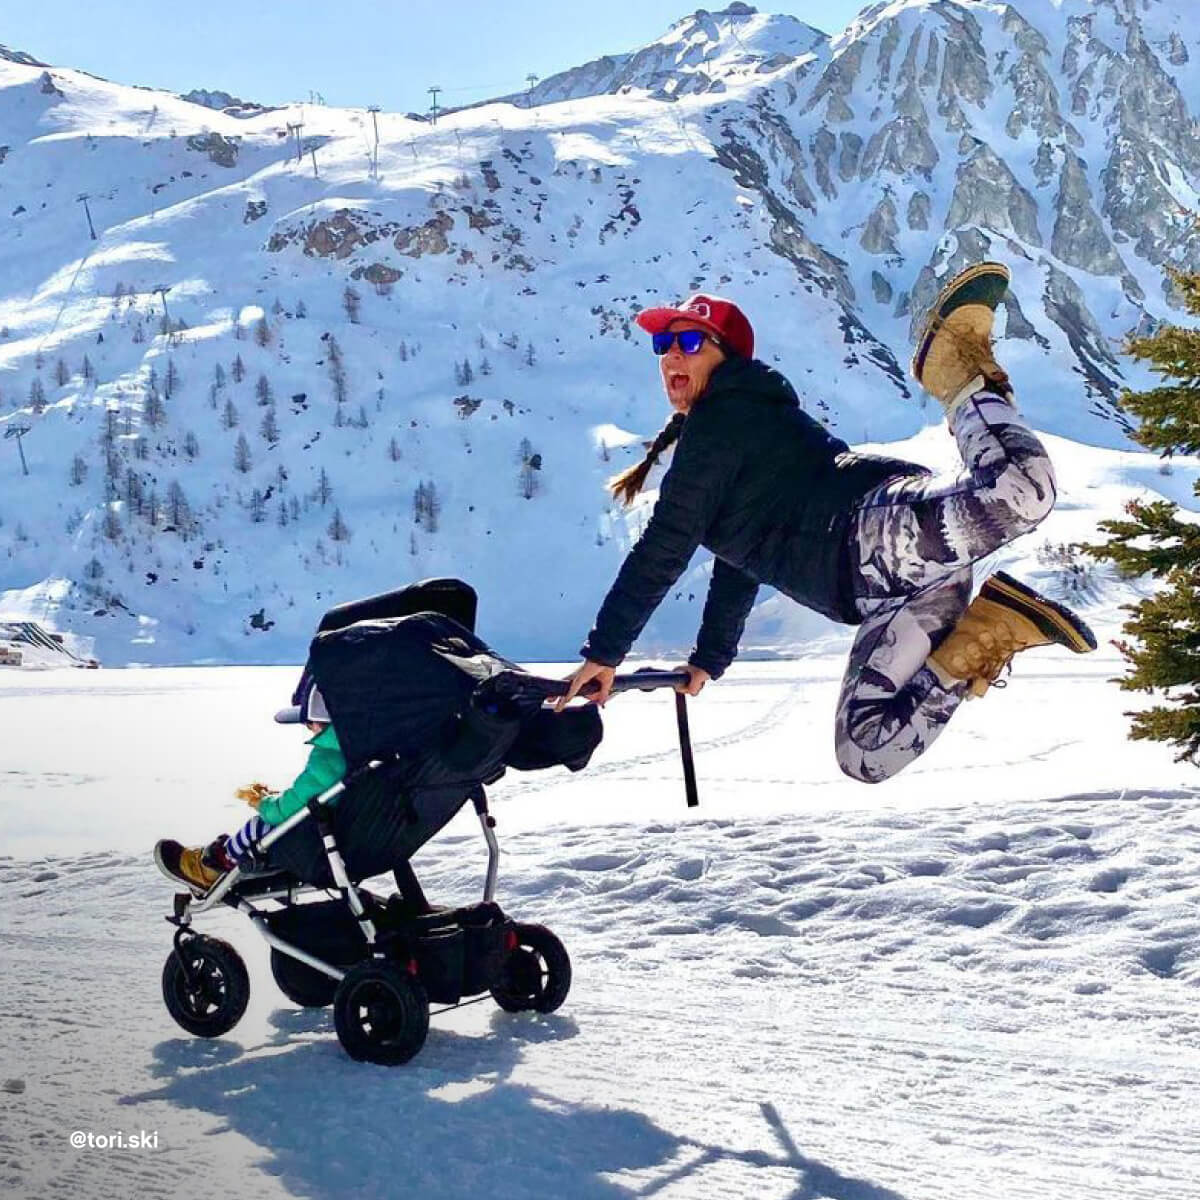  BABYZEN YOYO Skis - Allow Stroller to Slide Easily & Safely in  Snow - Includes Protective Bag : Baby